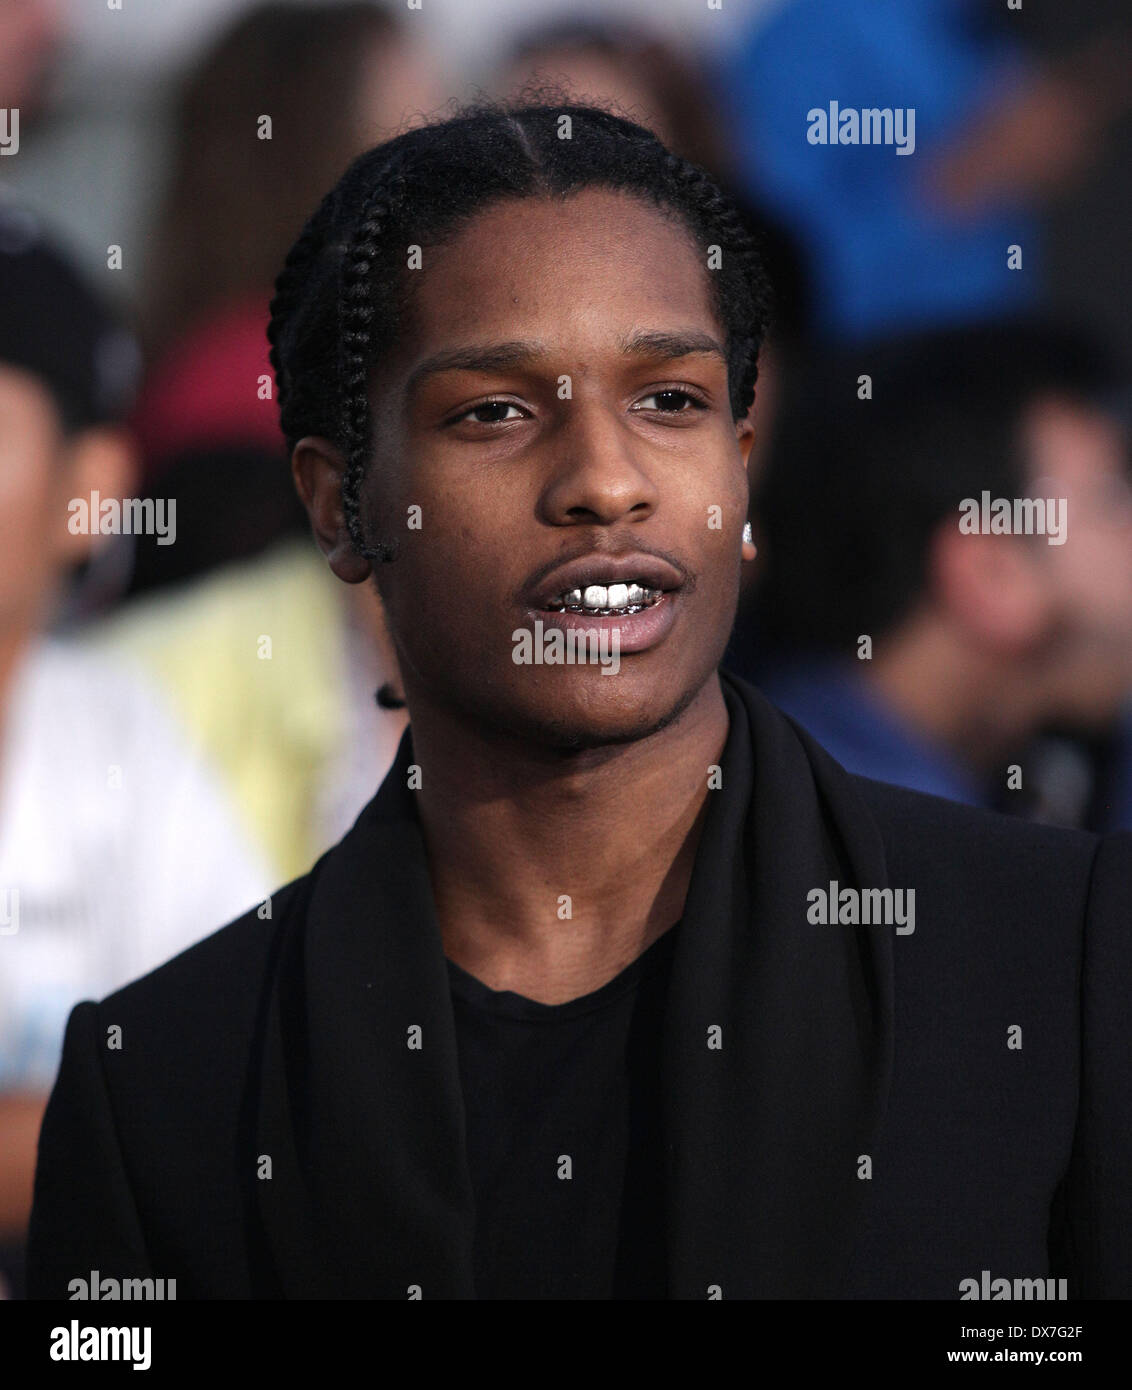 Westwood, California, USA. 18th Mar, 2014. Asap Rocky arrives for the premiere of the film 'Divergent' at the Bruin theater. © Lisa O'Connor/ZUMAPRESS.com/Alamy Live News Stock Photo